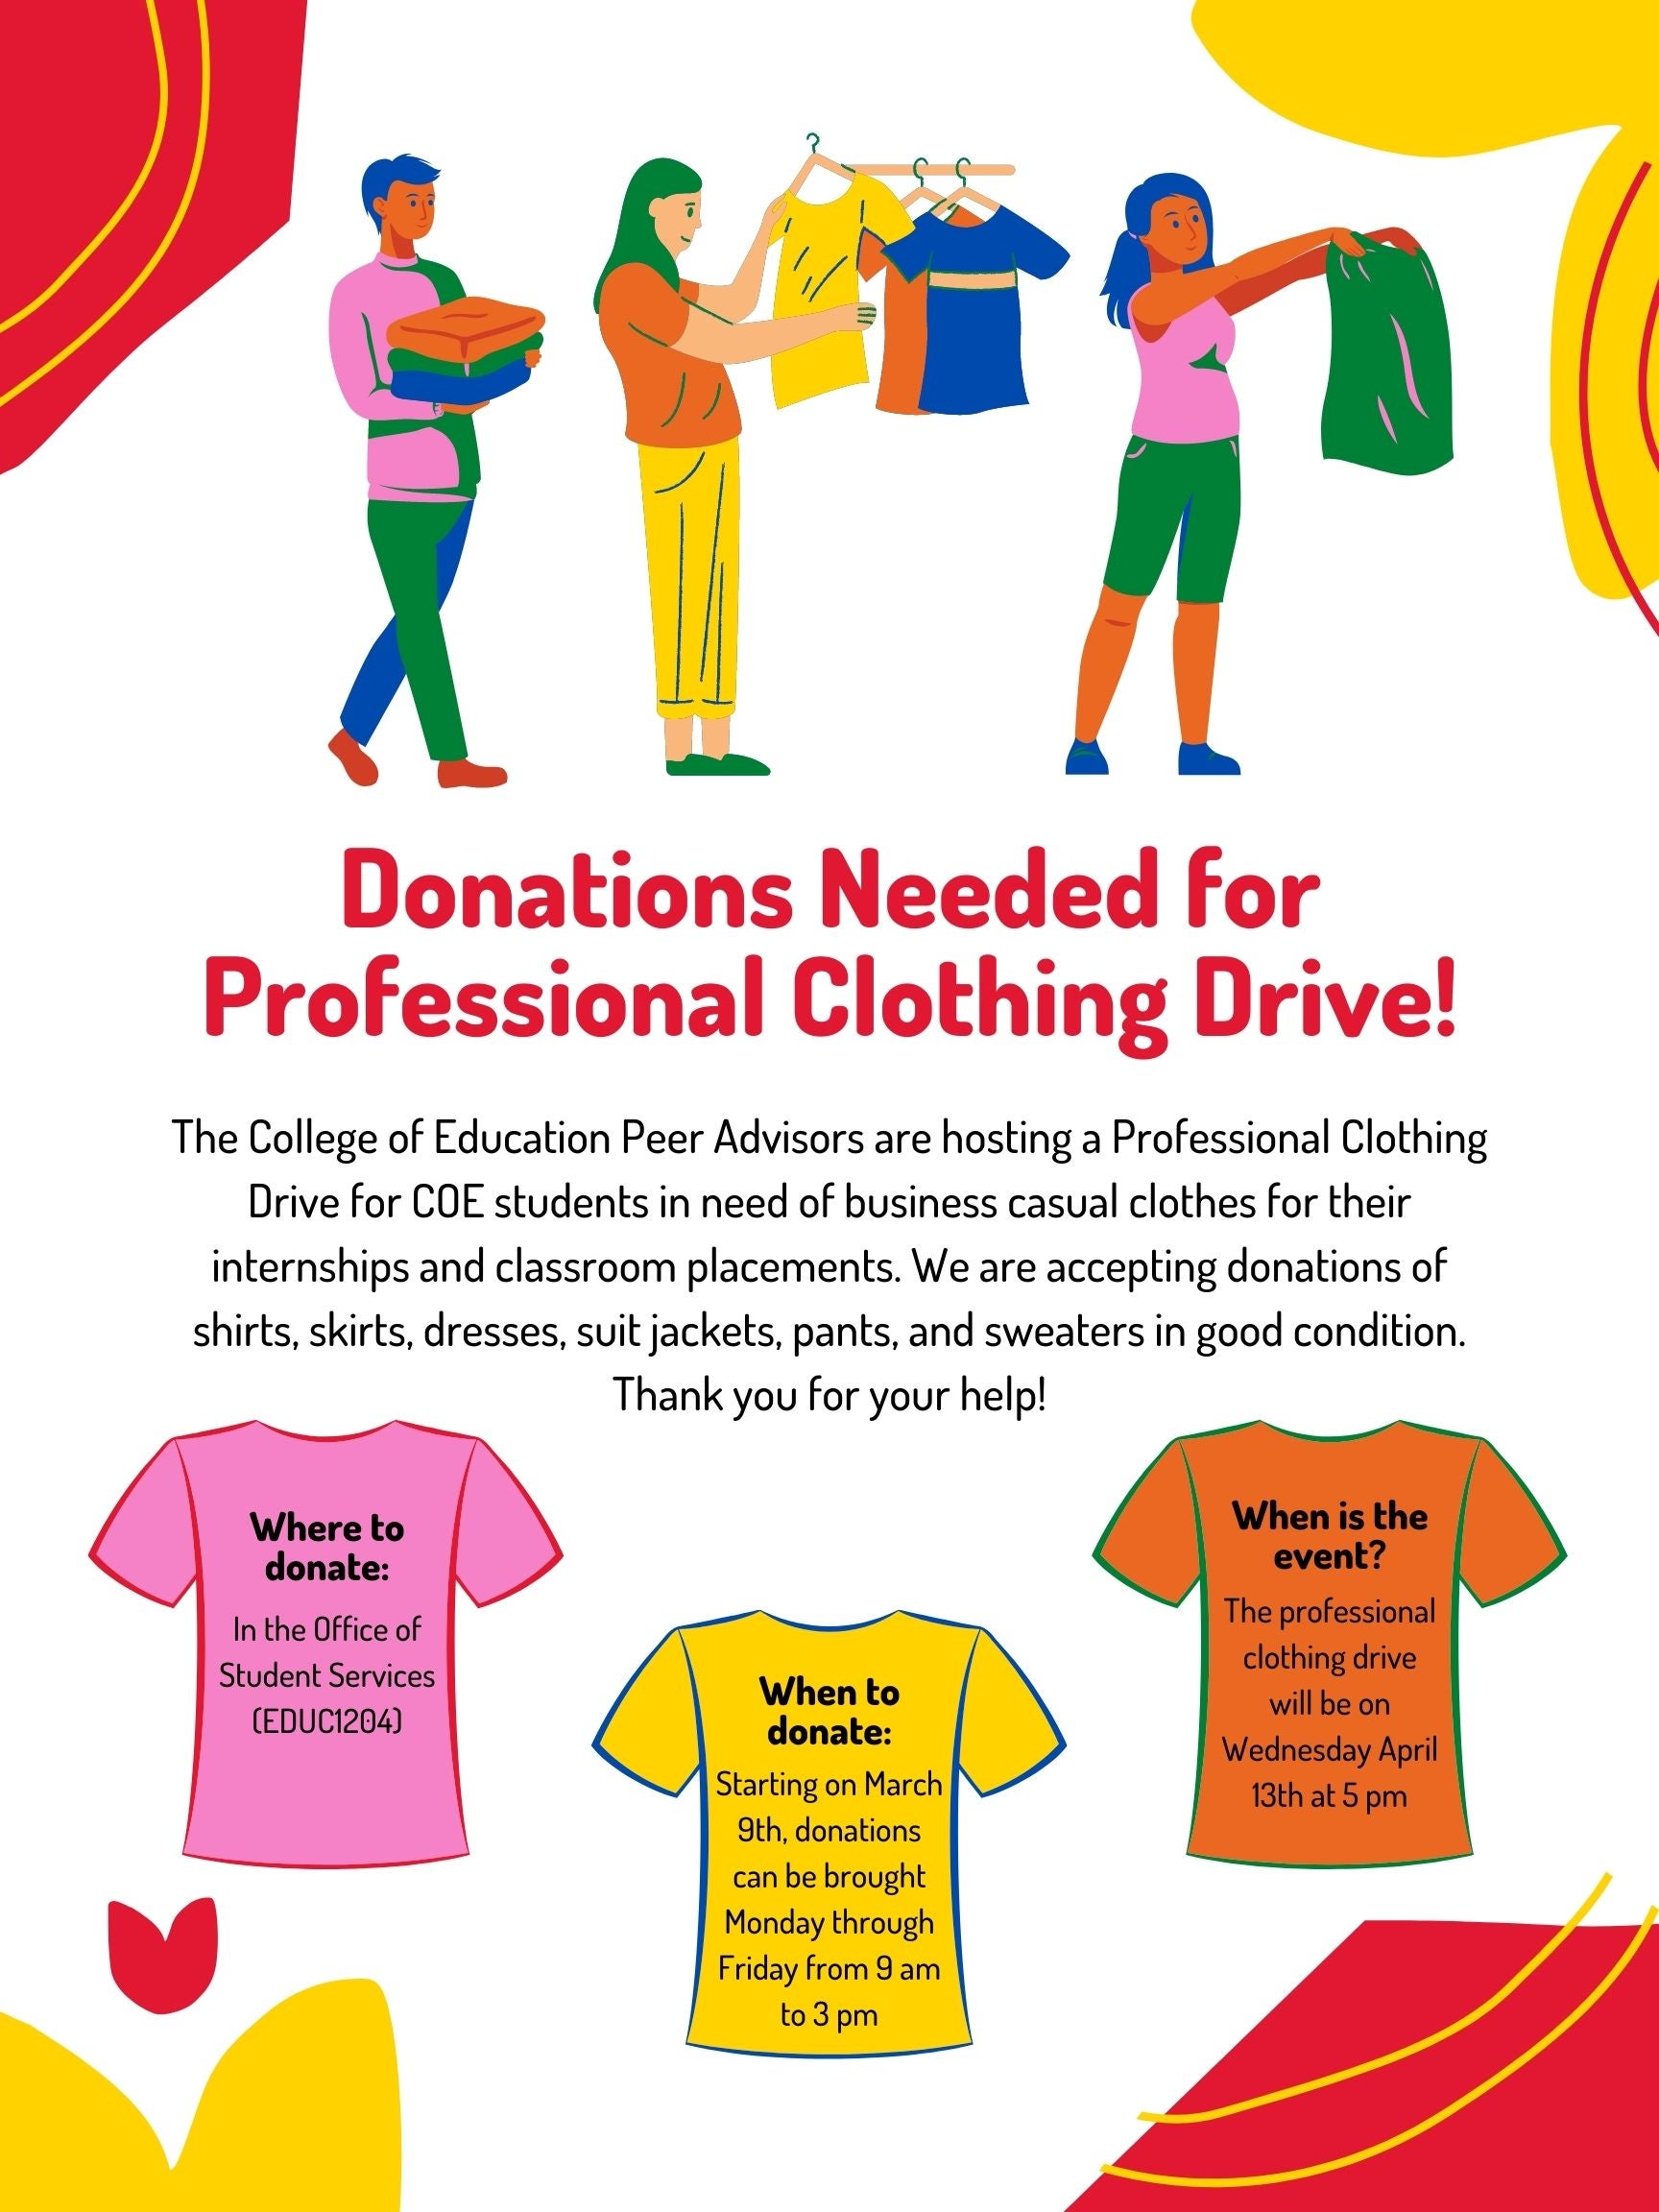 Donations for Professional Clothing Drive | UMD College of Education